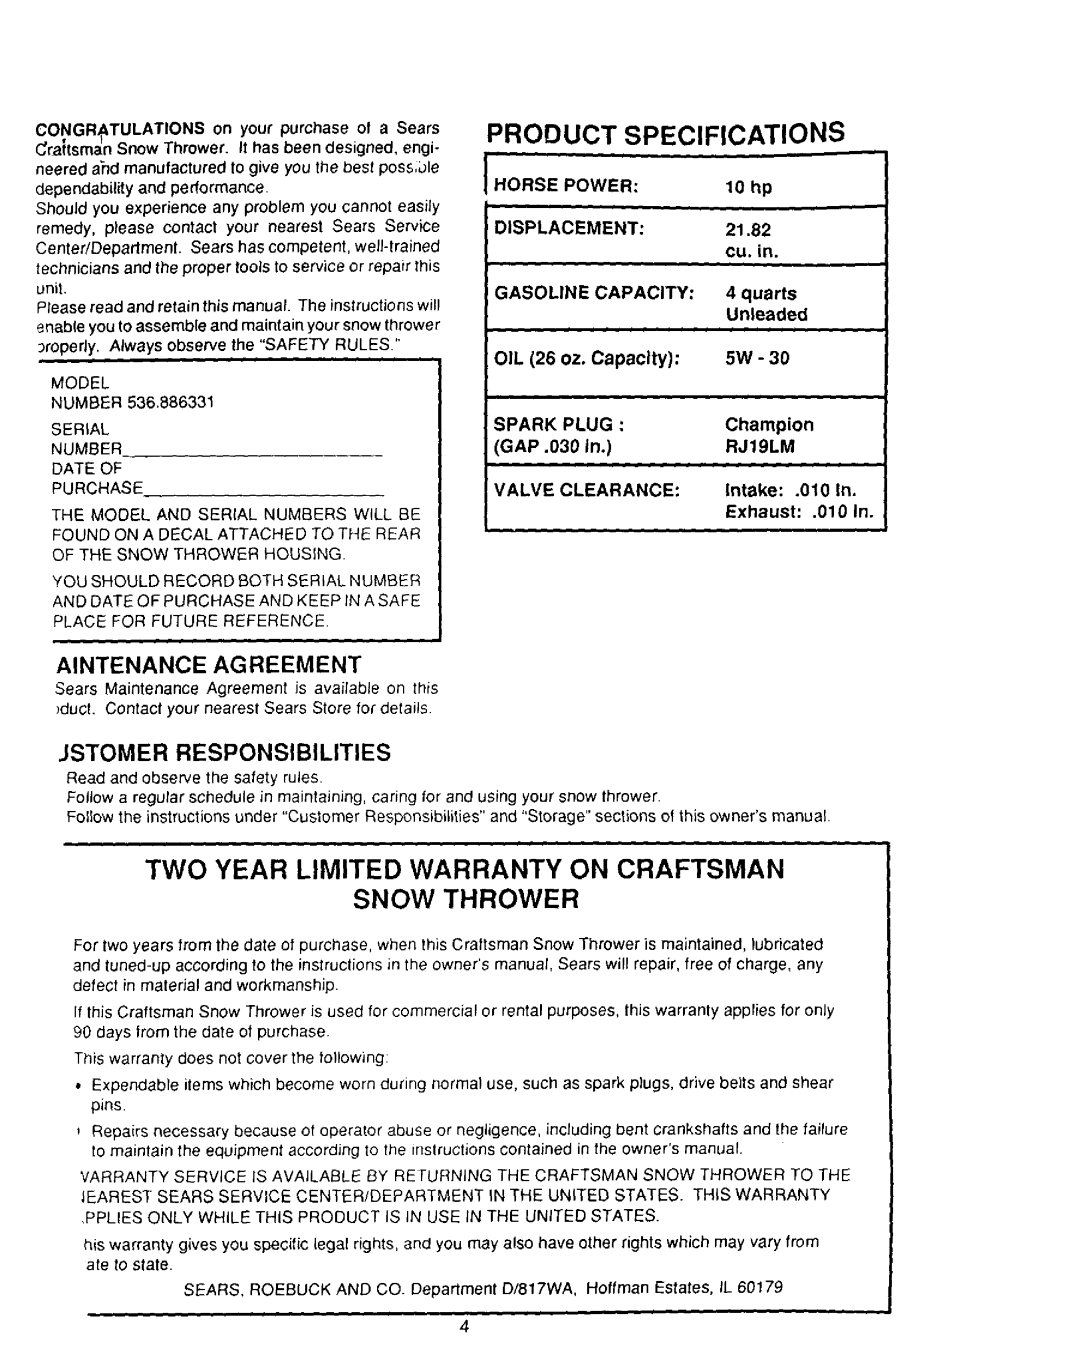 Sears 536.886331 Product Specifications, Two Year Limited Warranty On Craftsman, Aintenance Agreement, Spark Plug 